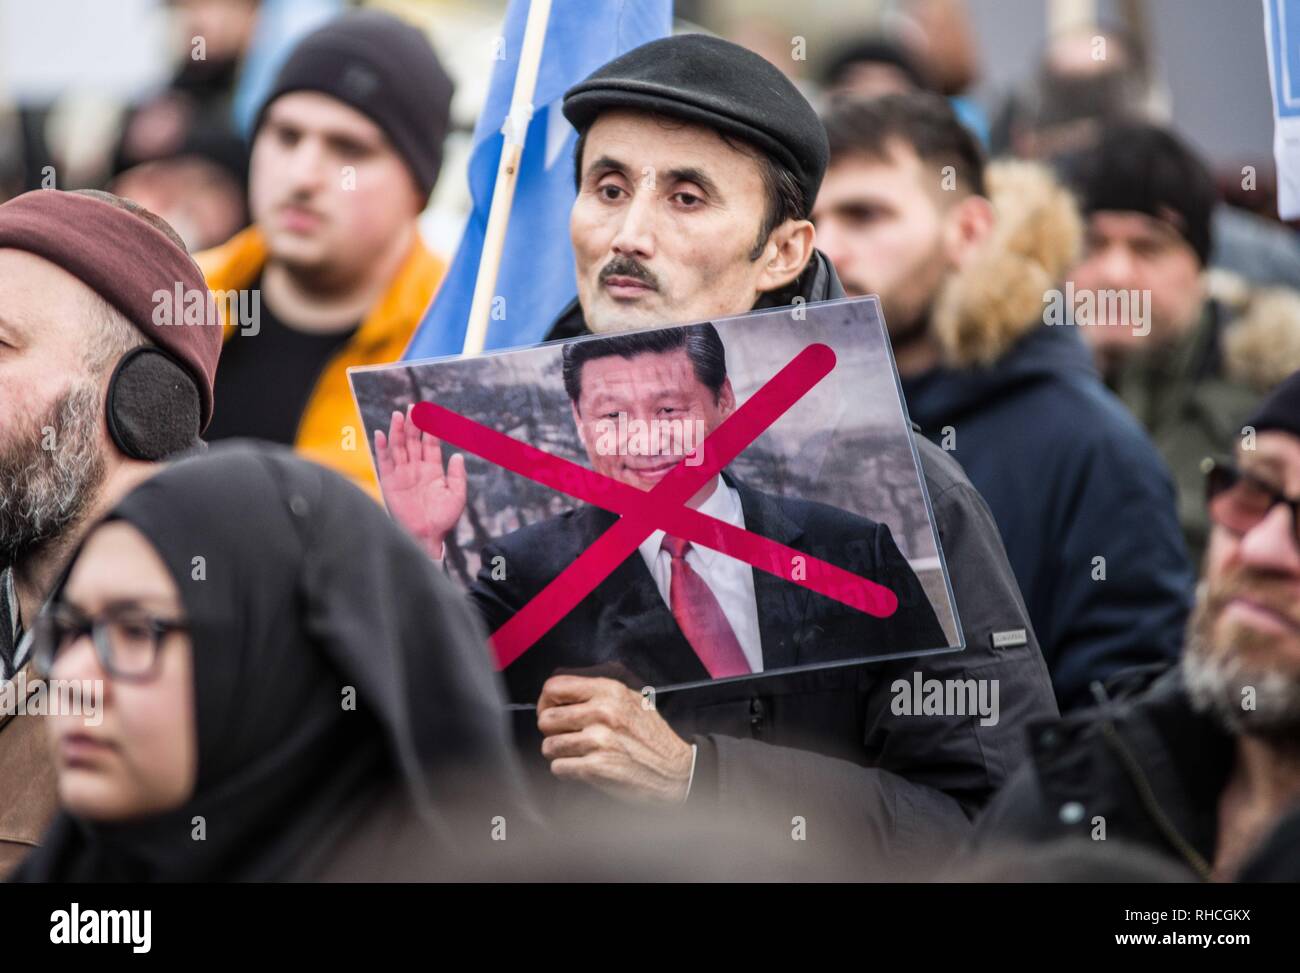 Munich, Bavaria, Germany. 2nd Feb, 2019. A protestor against the detentions of the Uyghurs in China holds a sign of a crossed out President Xi Jinping of China. to protest against the so-called 'Muslim Crackdown'' by the Chinese Communist Party in the Xinjiang Autonomous Region of China. The region is contains roughly 26 million people, 11 million of whom are the ethnically Turkic Uyghurs who still call the region East Turkistan . The CCP has placed upwards of 1 million Uyghurs in reeducation camps, as Credit: ZUM Credit: ZUMA Press, Inc./Alamy Live News Stock Photo